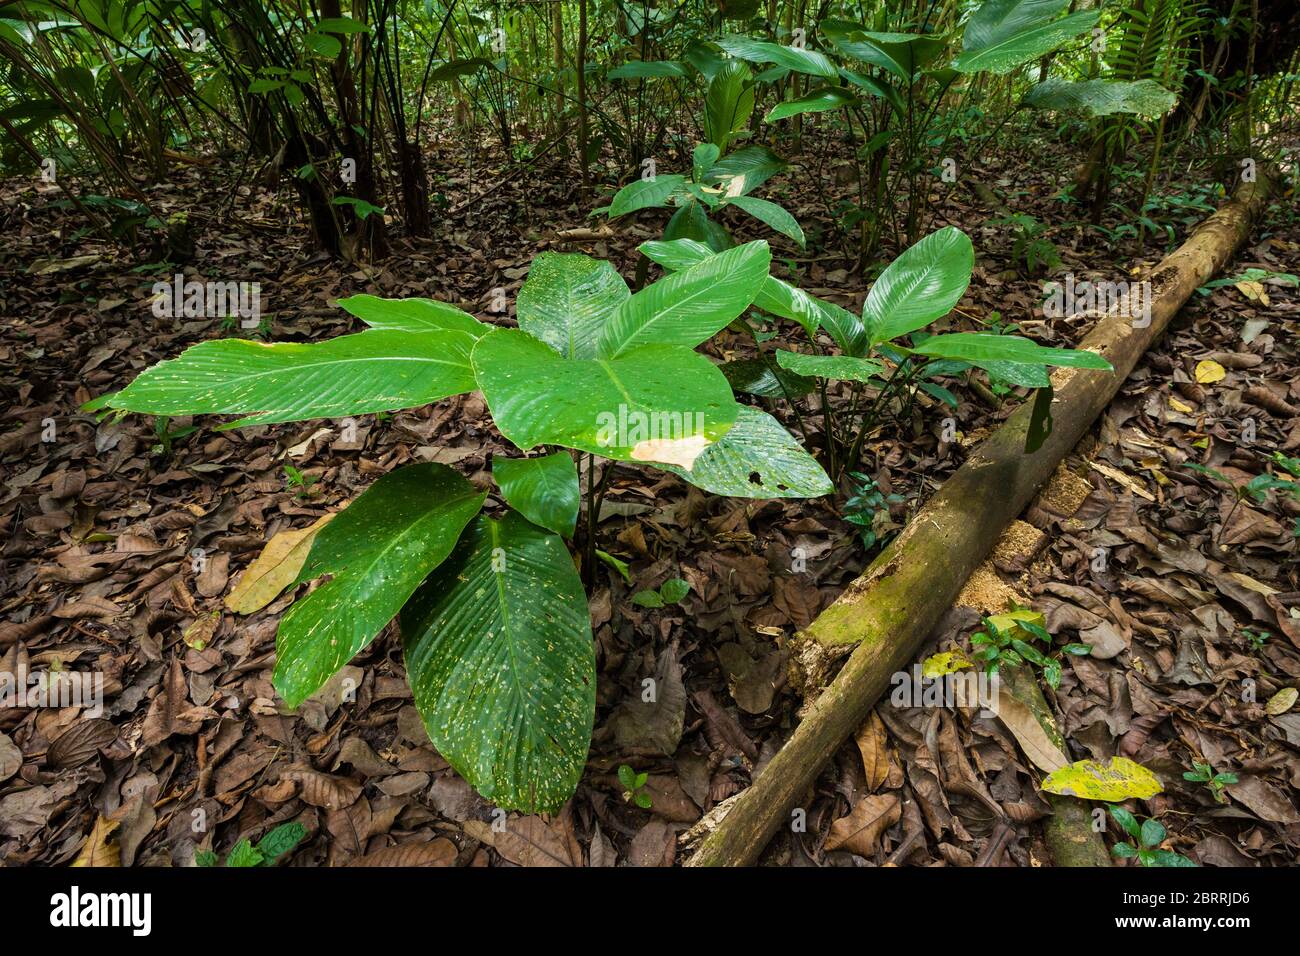 Plants in the dry season, in the understory of the rainforest in Soberania national park, Republic of Panama. Stock Photo